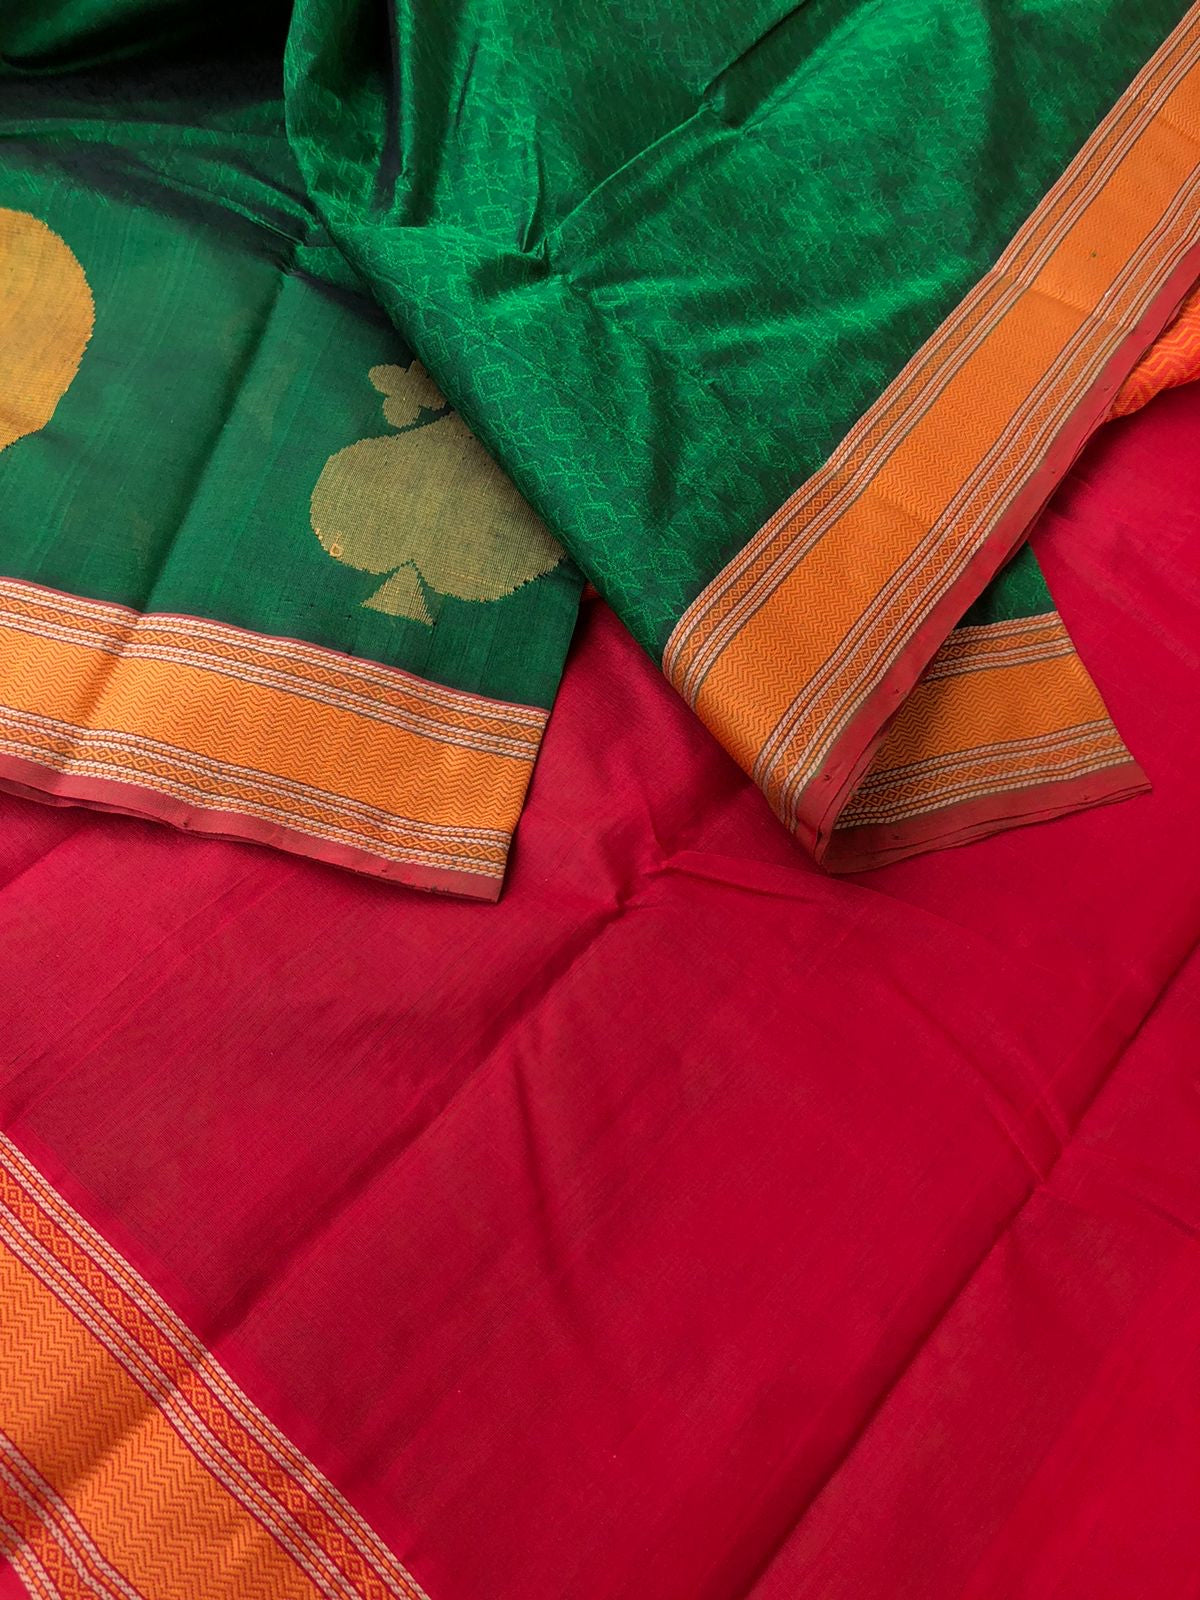 Woven Motifs Silk Cotton - Meenakshi green and red with paisley buttas